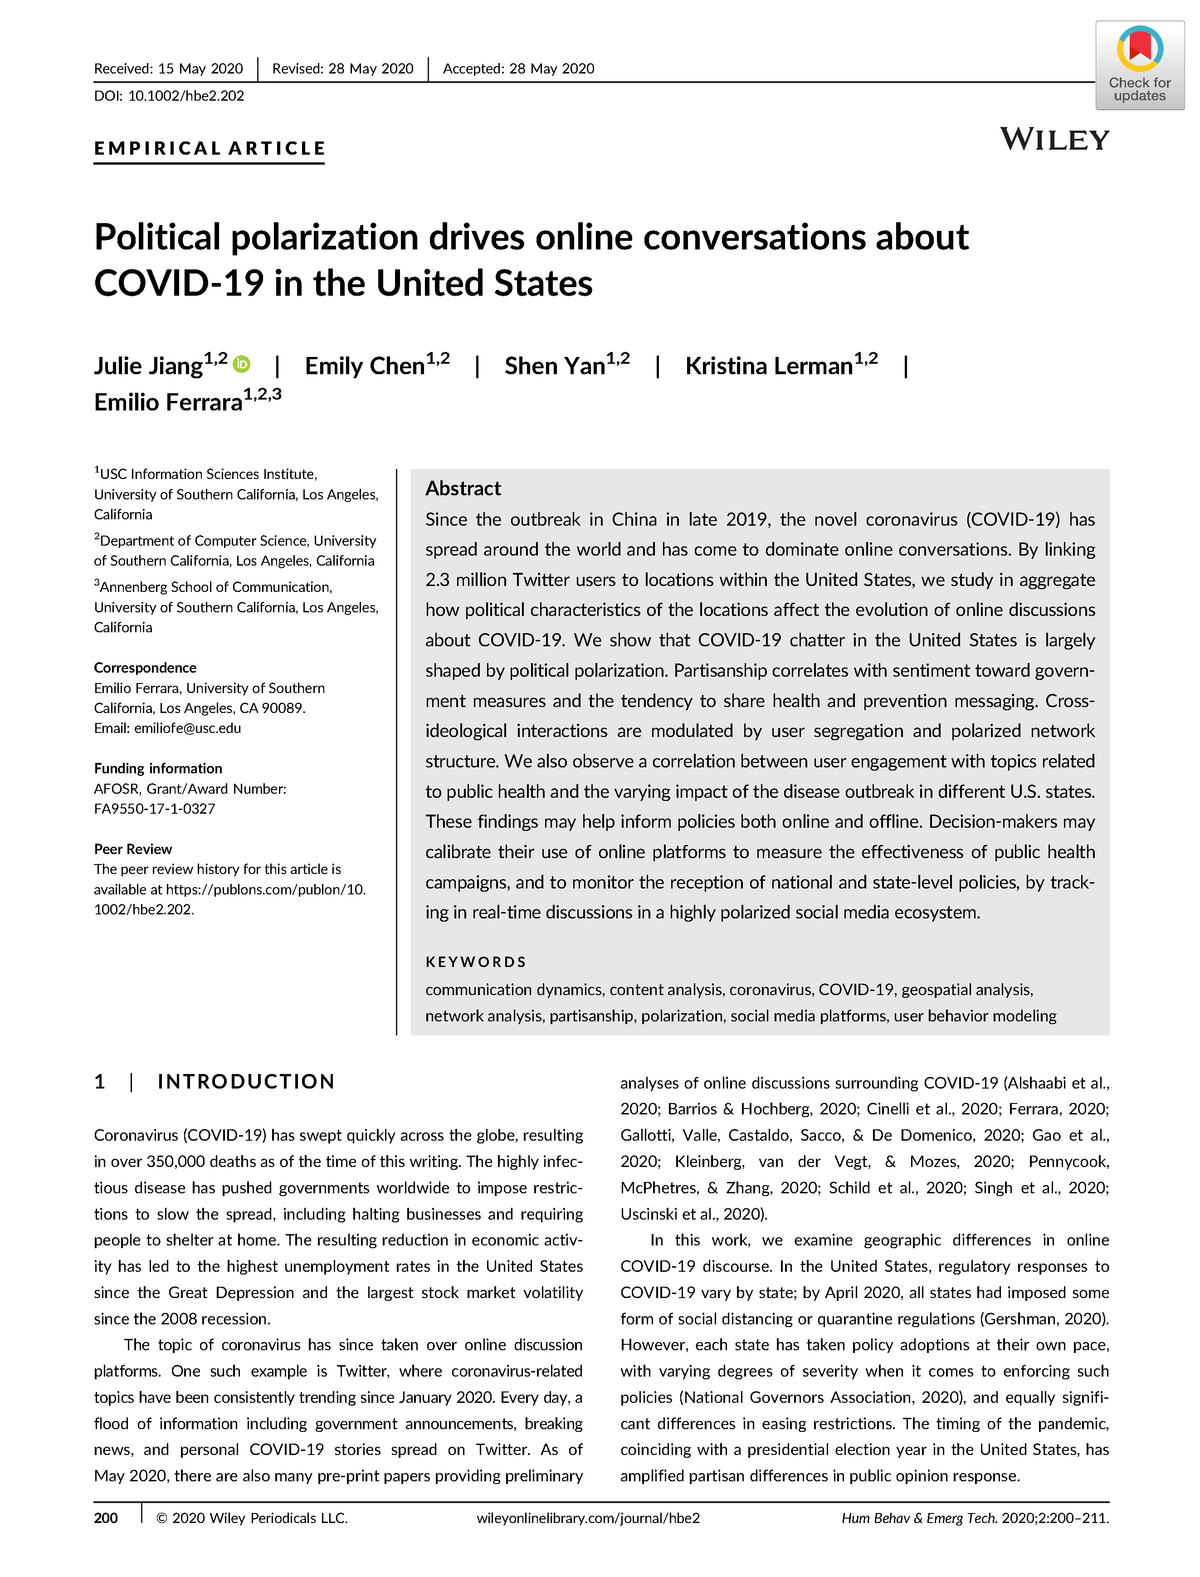 Political polarization drives online conversations about Covid19 in US